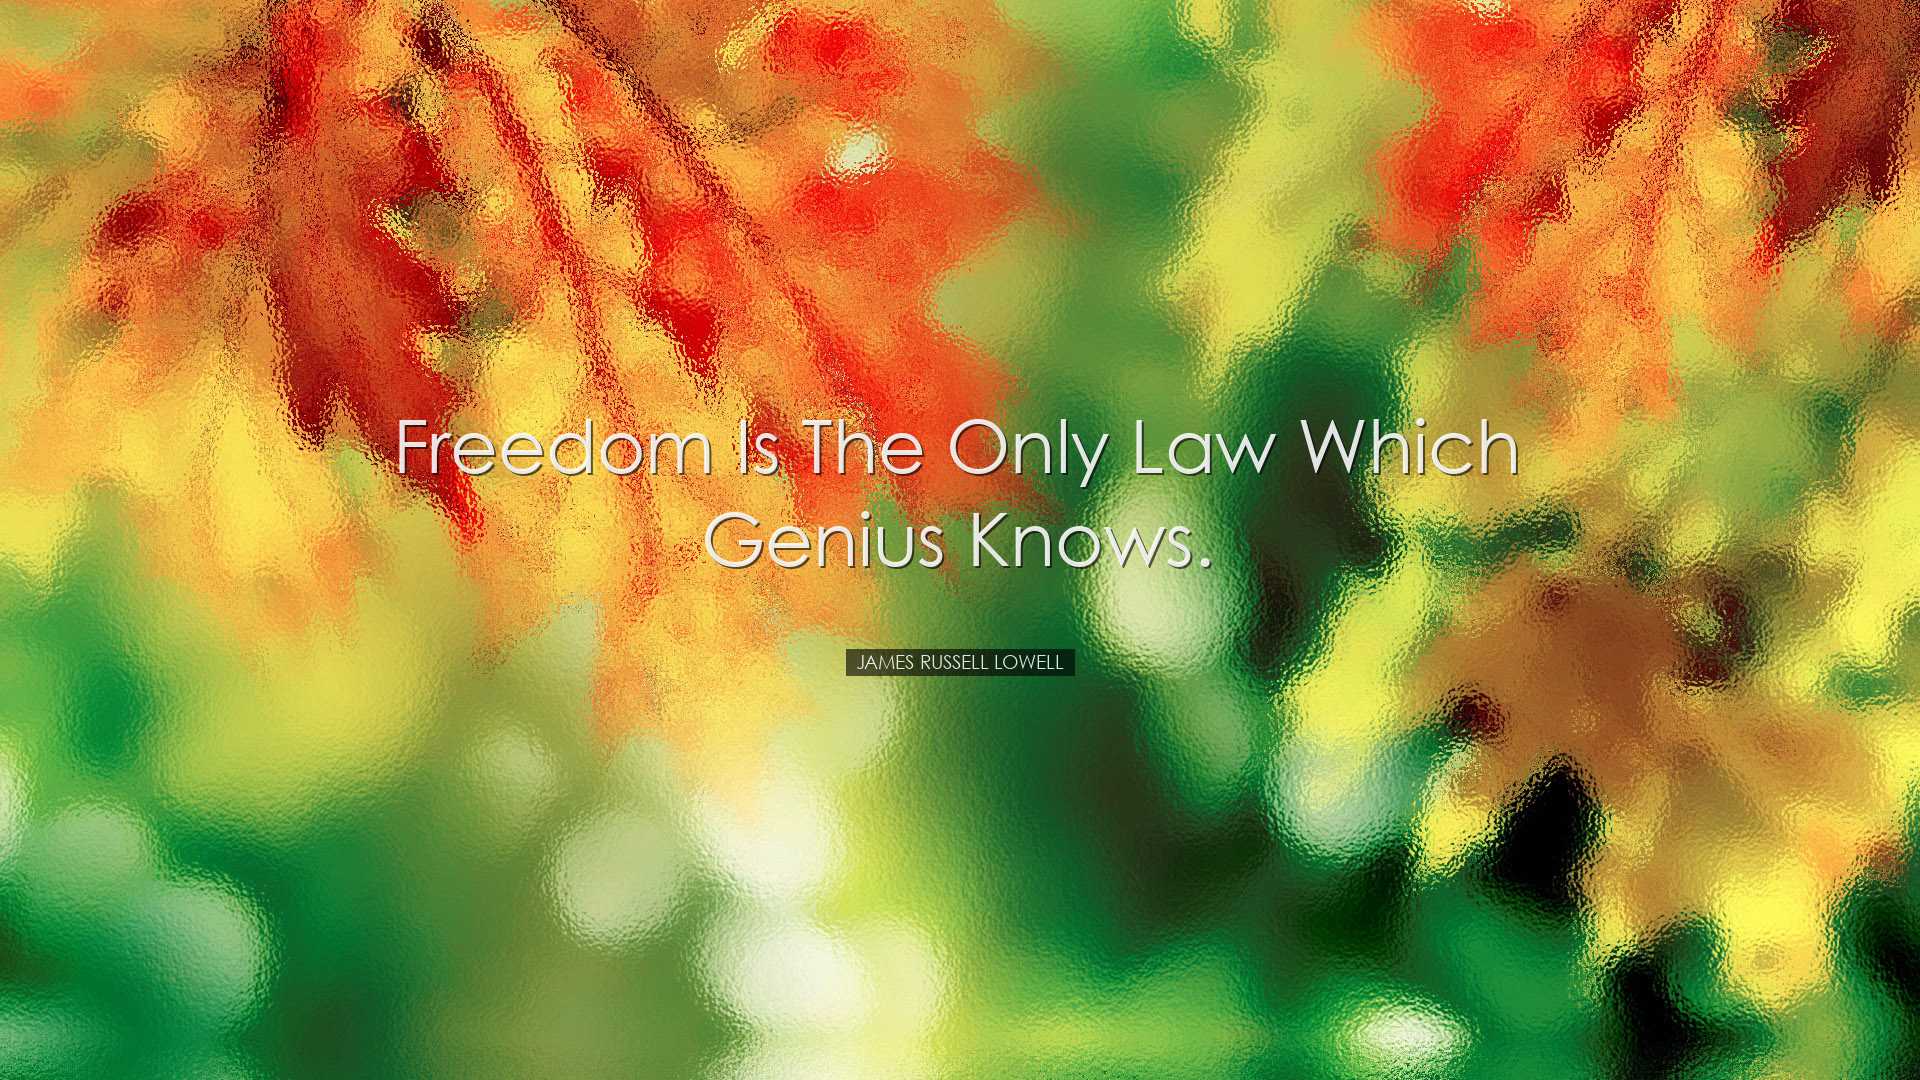 Freedom is the only law which genius knows. - James Russell Lowell